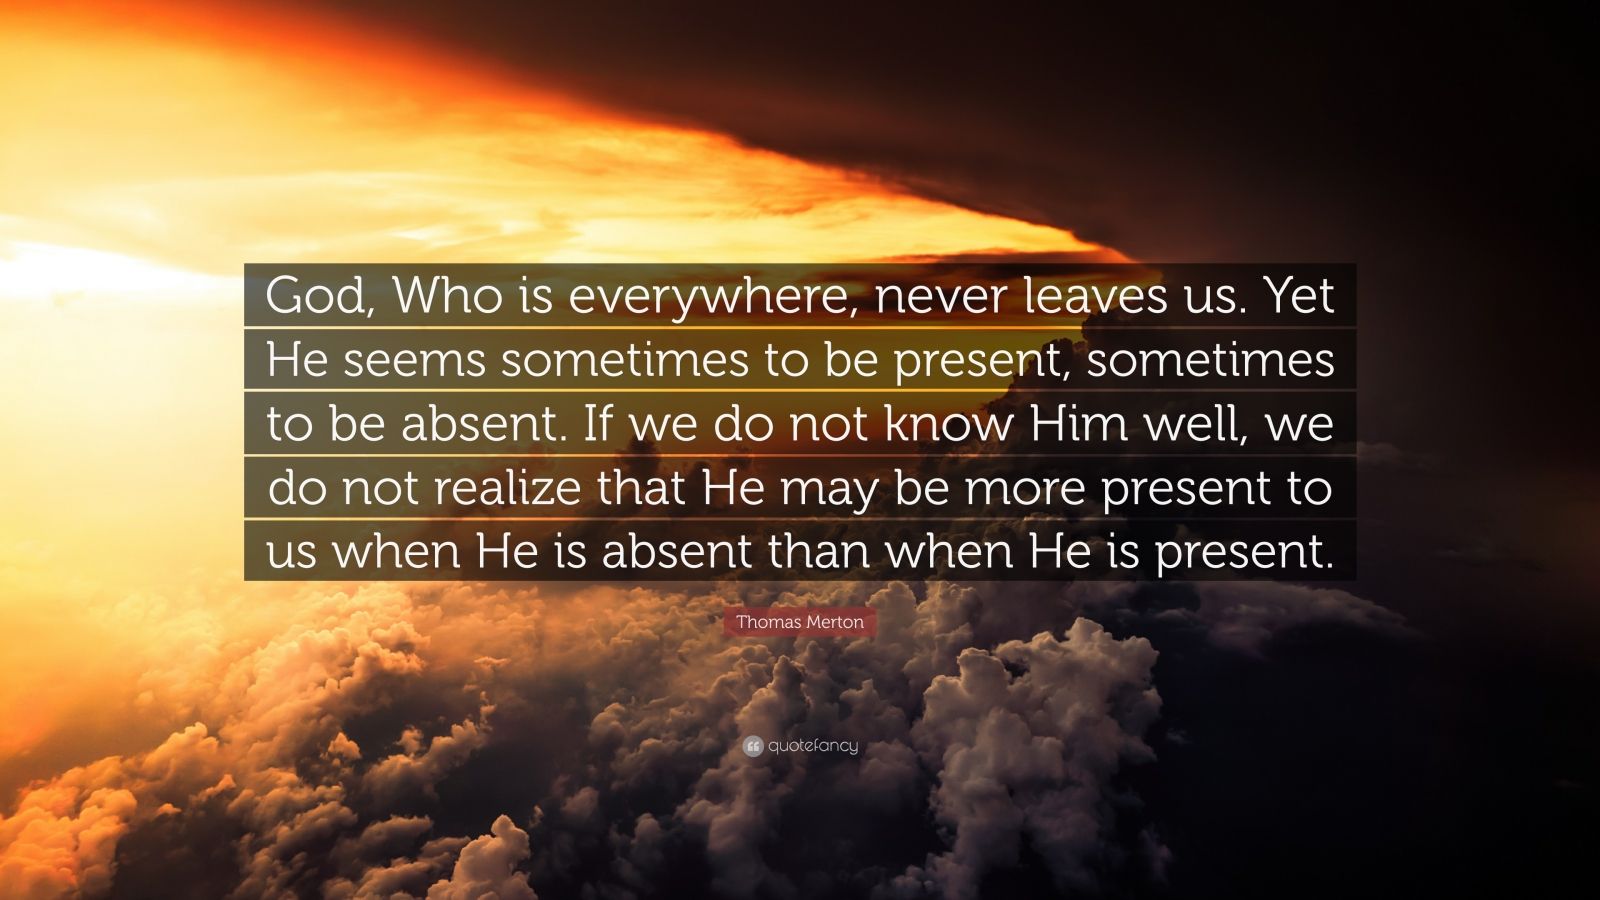 Thomas Merton Quote: “God, Who is everywhere, never leaves us. Yet He ...